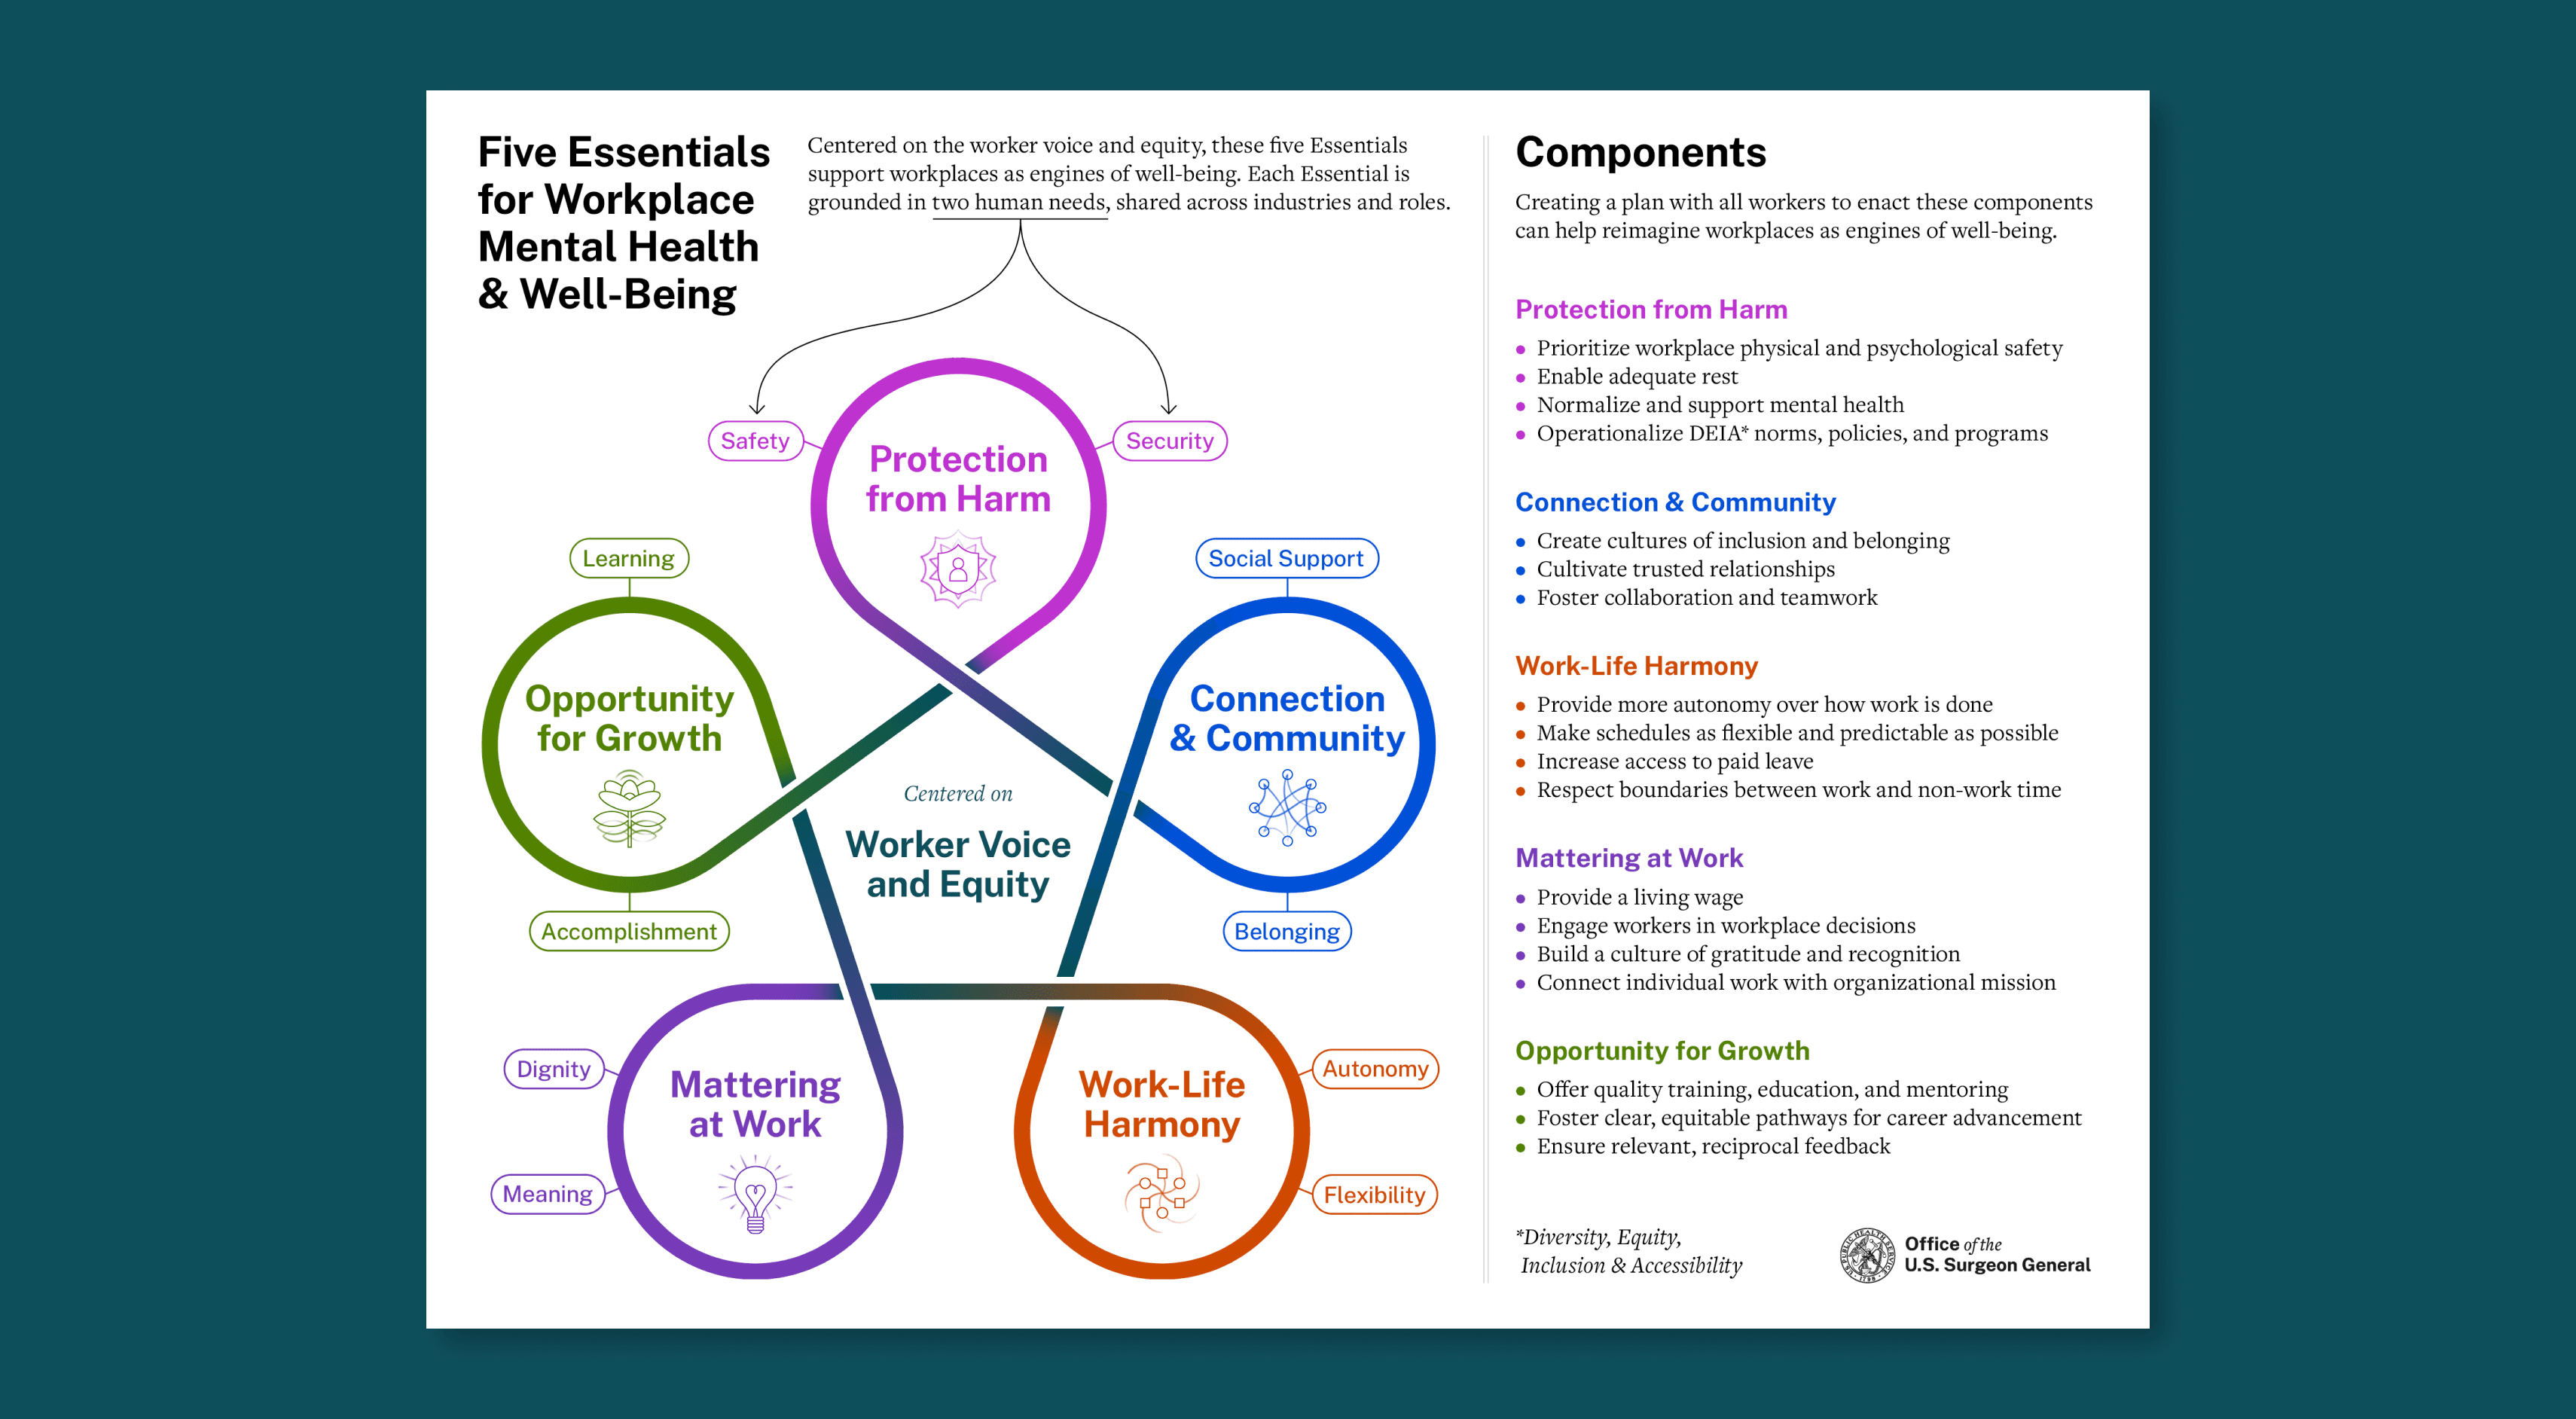 Illustration of five essentials—Protection from Harm, Connection and Community, Work-Life Harmony, Mattering at Work, Opportunity for Growth—in a circle with Worker Voice and Equity in the center graphic